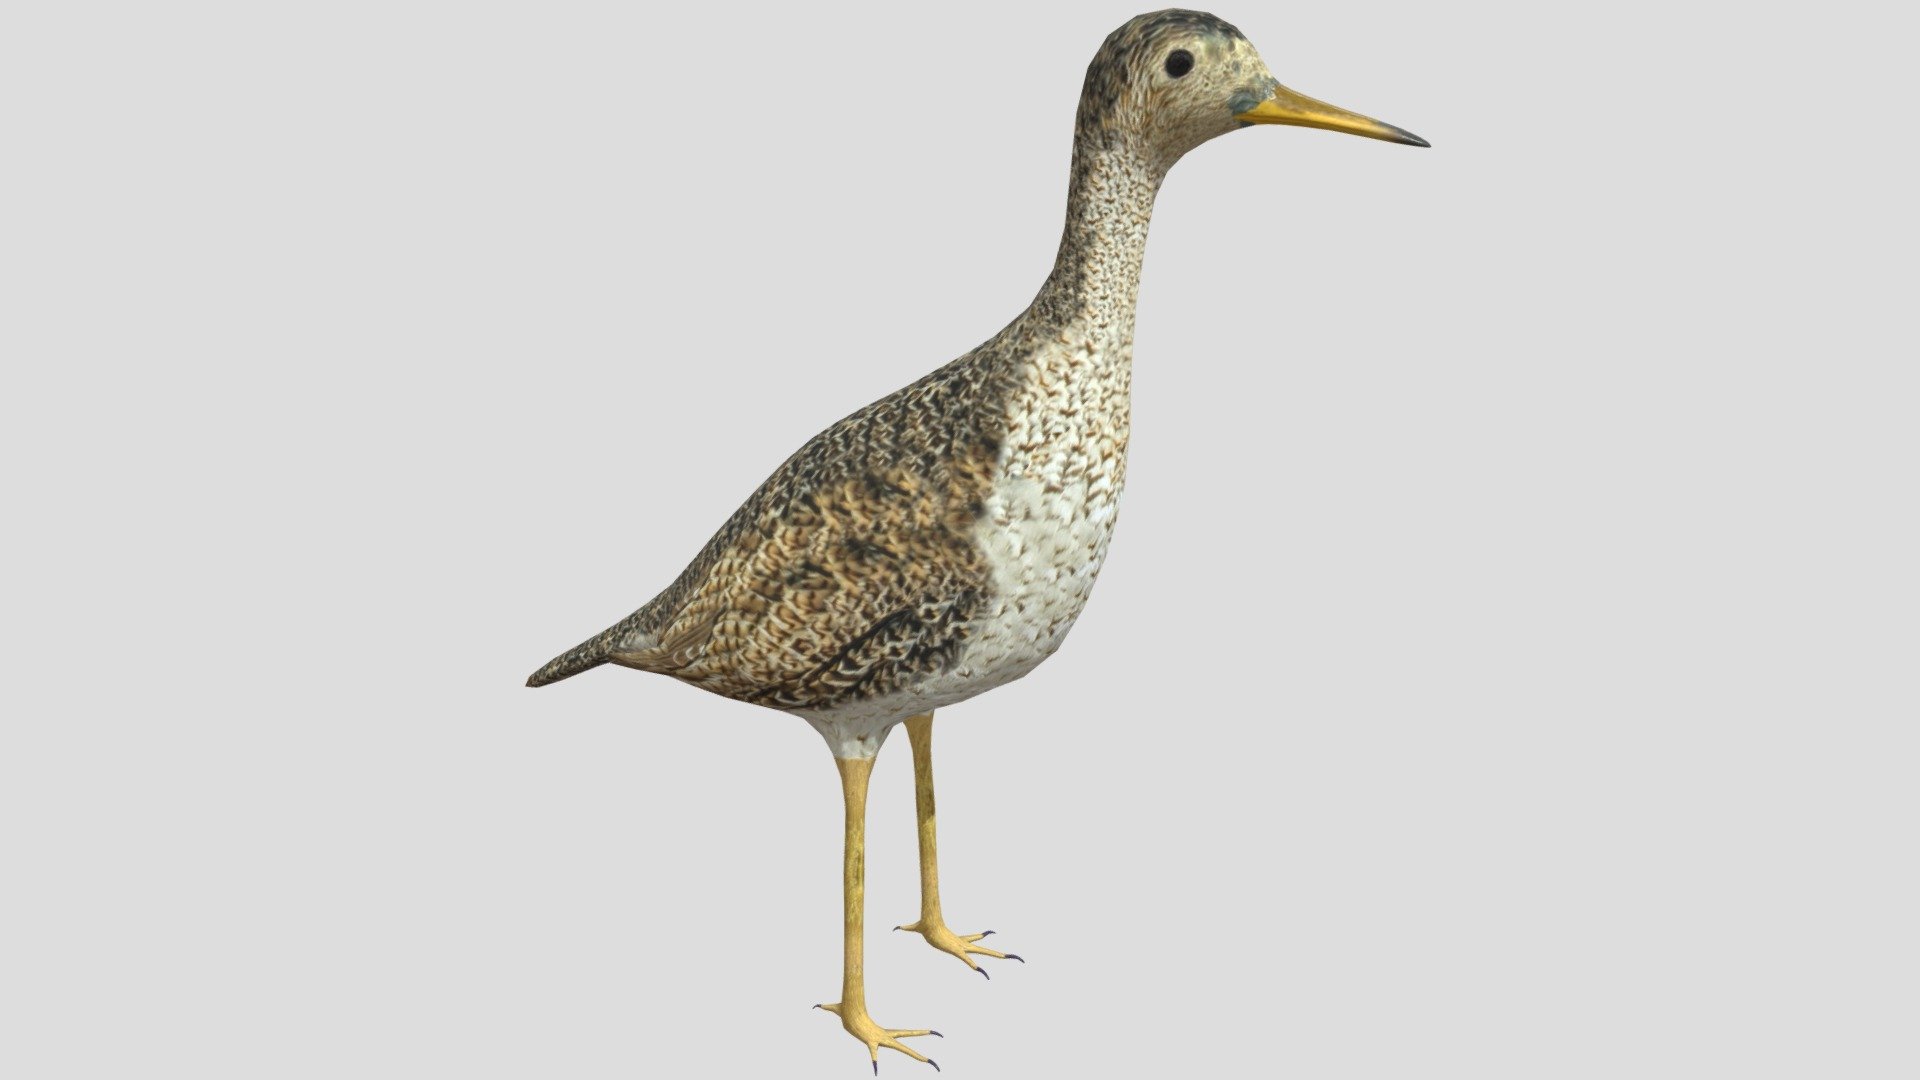 The upland sandpiper (Bartramia longicauda) is a large sandpiper, closely related to the curlews.Older names are the upland plover and Bartram's sandpiper.
-Modeled in Blender.
-Texture 4096x4096 pxls JPEG.
-Color,Normal and Roughness maps 3d model